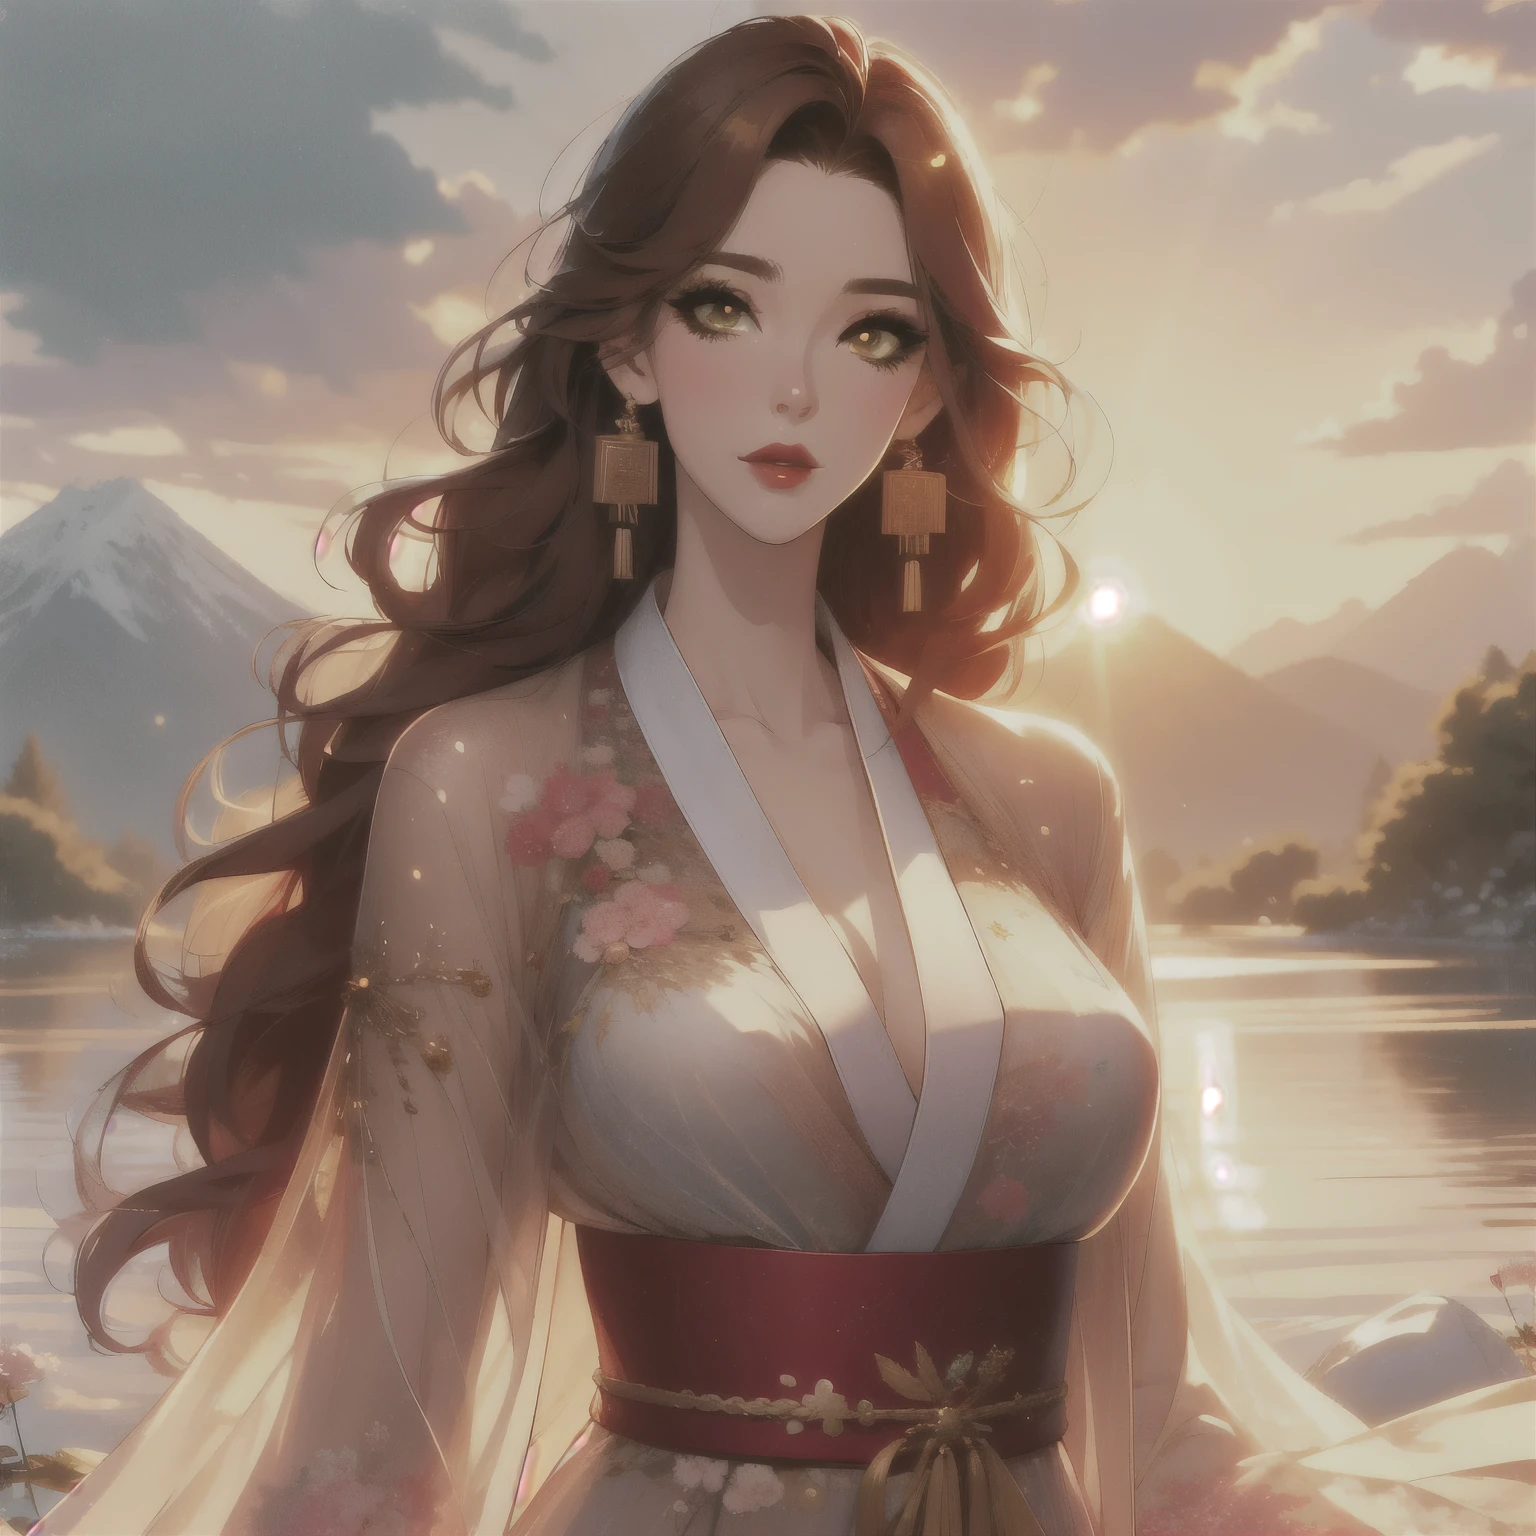 best quality, masterpiece, detail：1.4，hdr, HighDynamicRange, Ray traching，Research-usory interface，NVIDIA RTX ill herding, PBR textures, post processing, anisotropy filtering, Golden eyes, red wavy long hair woman, hanfu, elegant, detailed skin texture， depth of field, maximum resolution and sharpness, any layer textures，perfectly proportioned，octane rendering，Two-tone light，beautiful landscape in the background, mountains and cherry trees, large aperture, perfect body woman, delicate pupils，fine eyelashes and long eyelashes，pink lips, clear, cute face, sweet woman